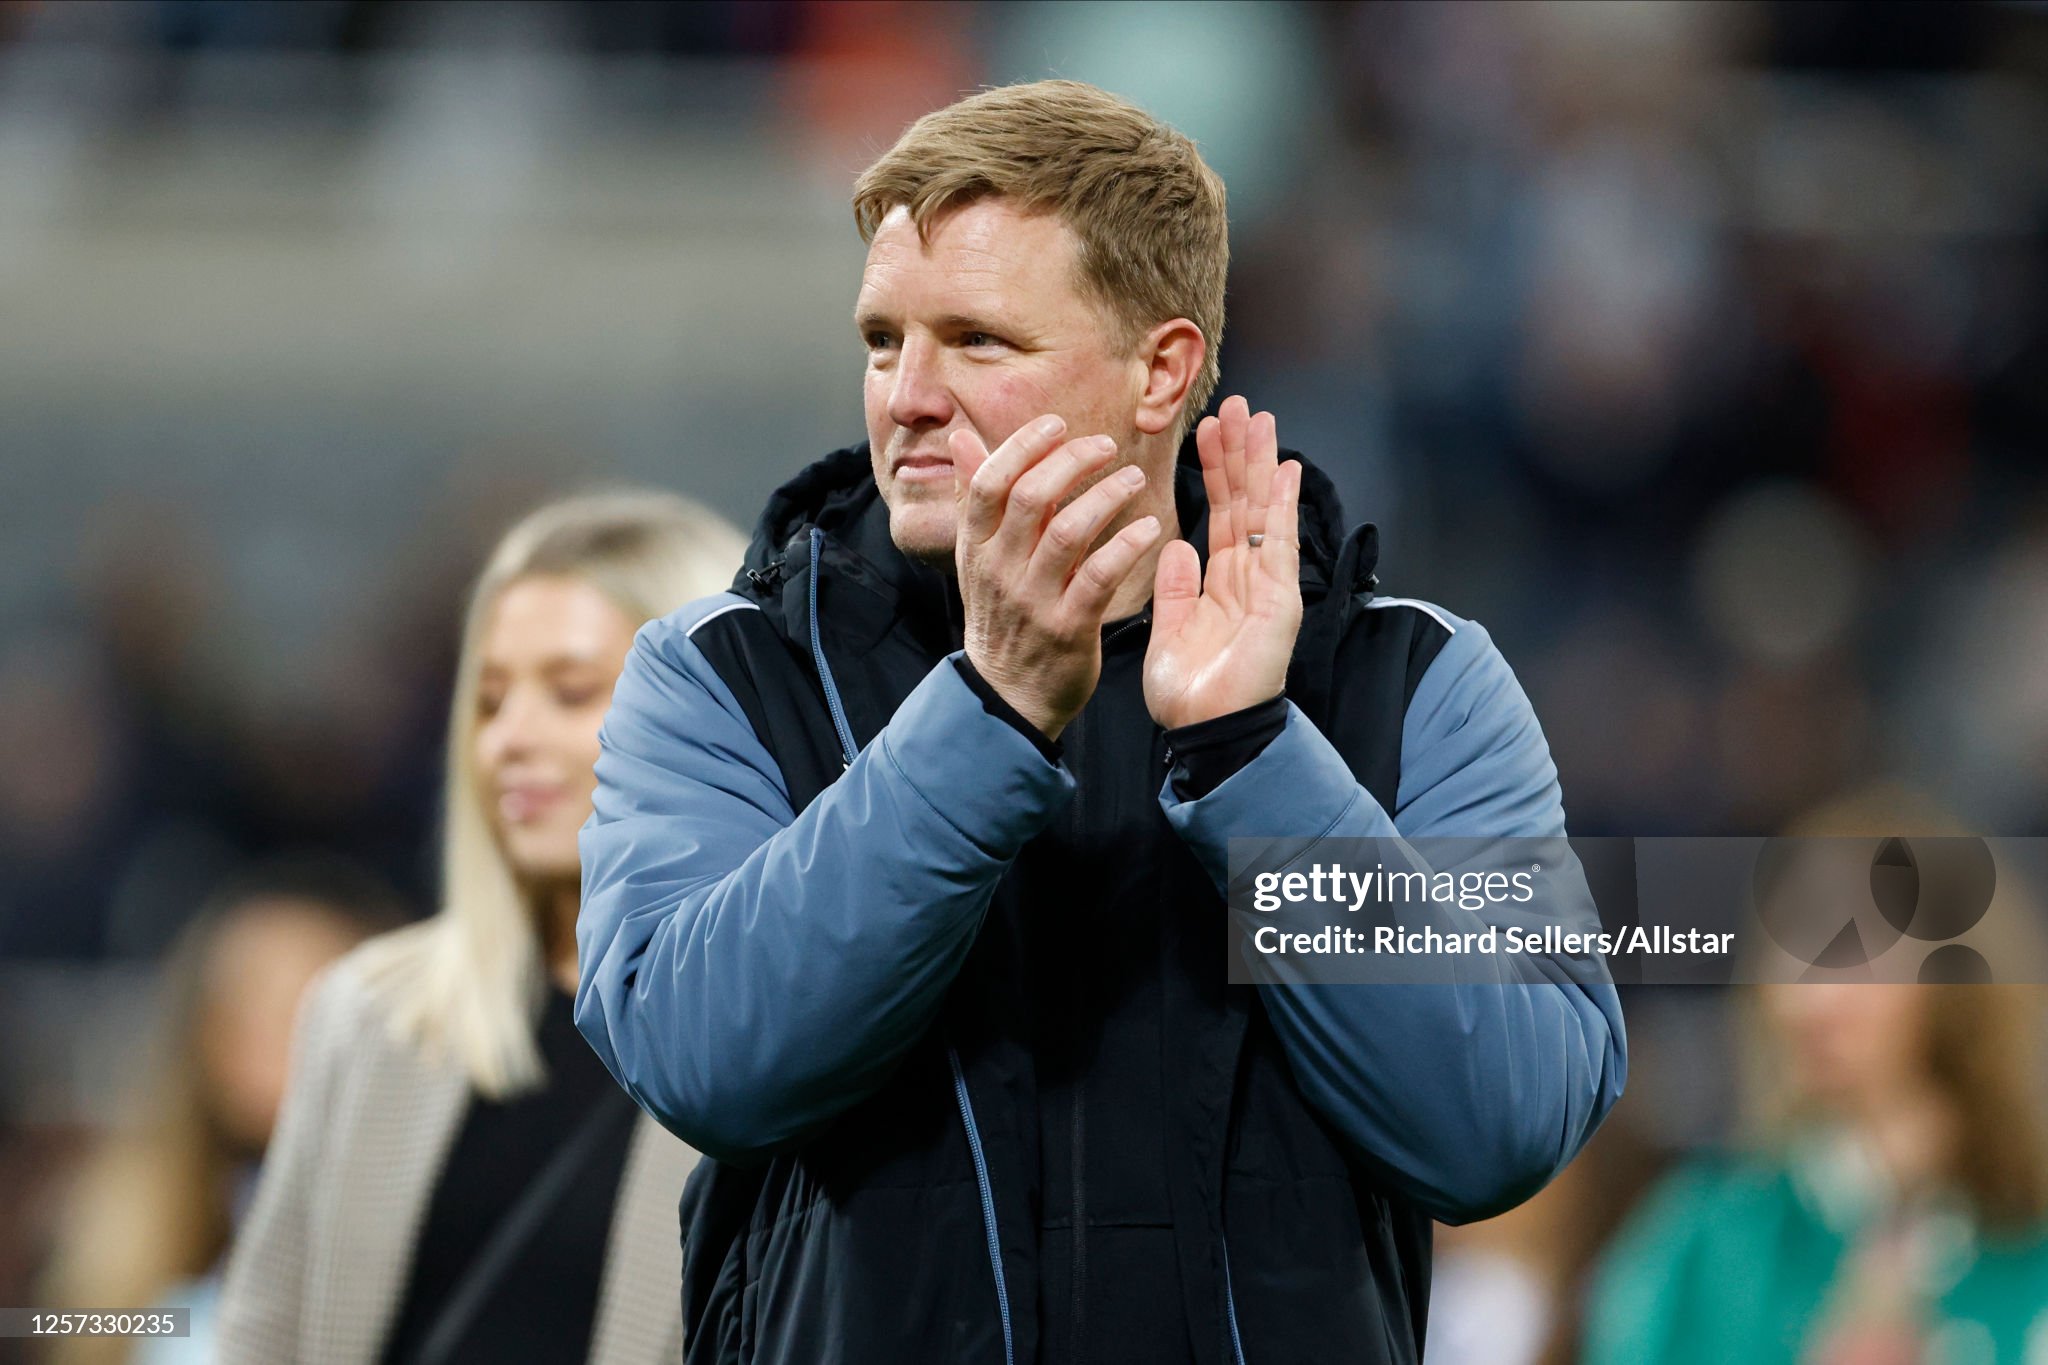 Eddie Howe is a successful manager who will be leading Newcastle into the Champions League